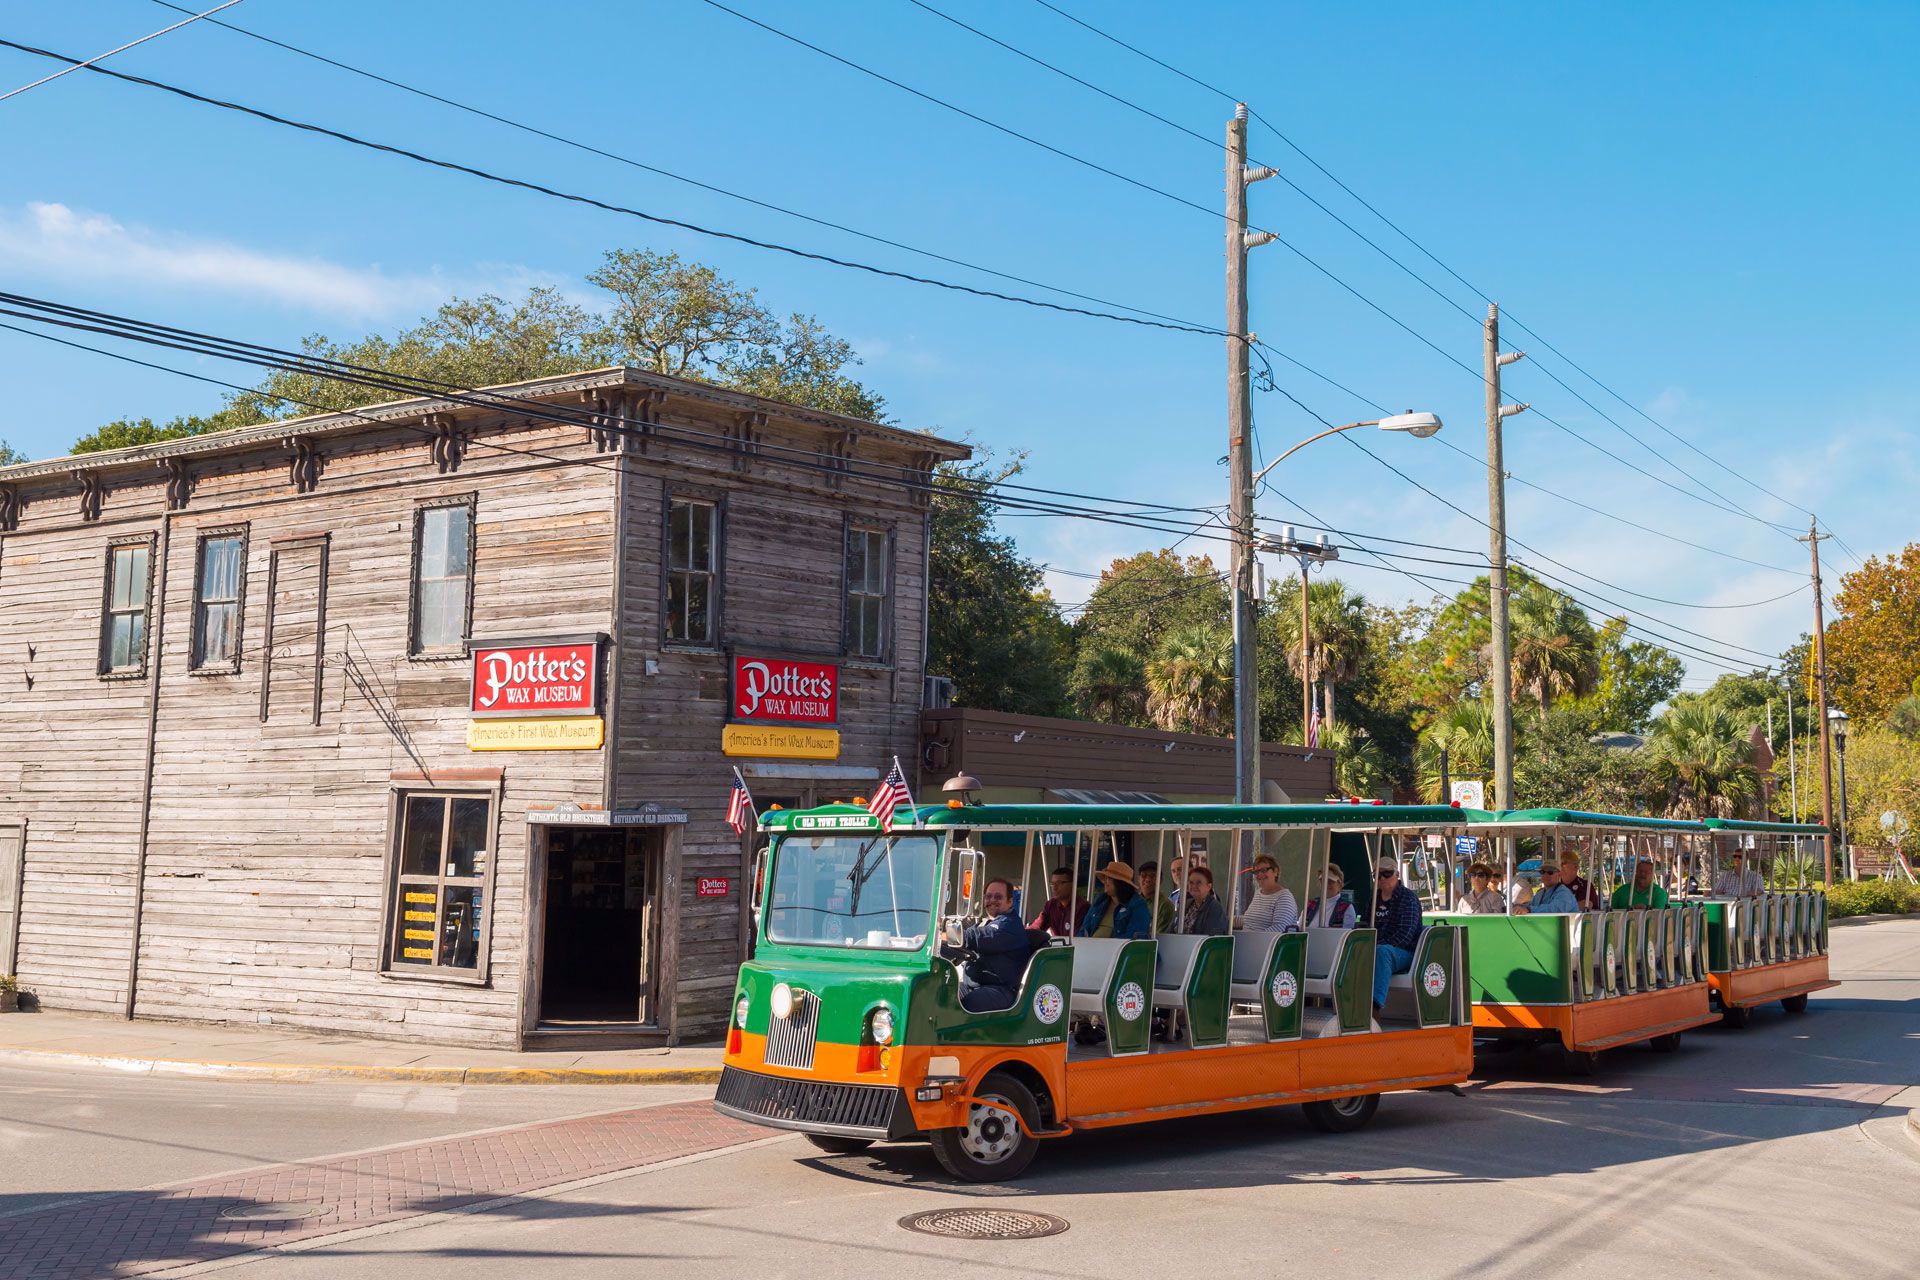 st augustine trolley tour hours